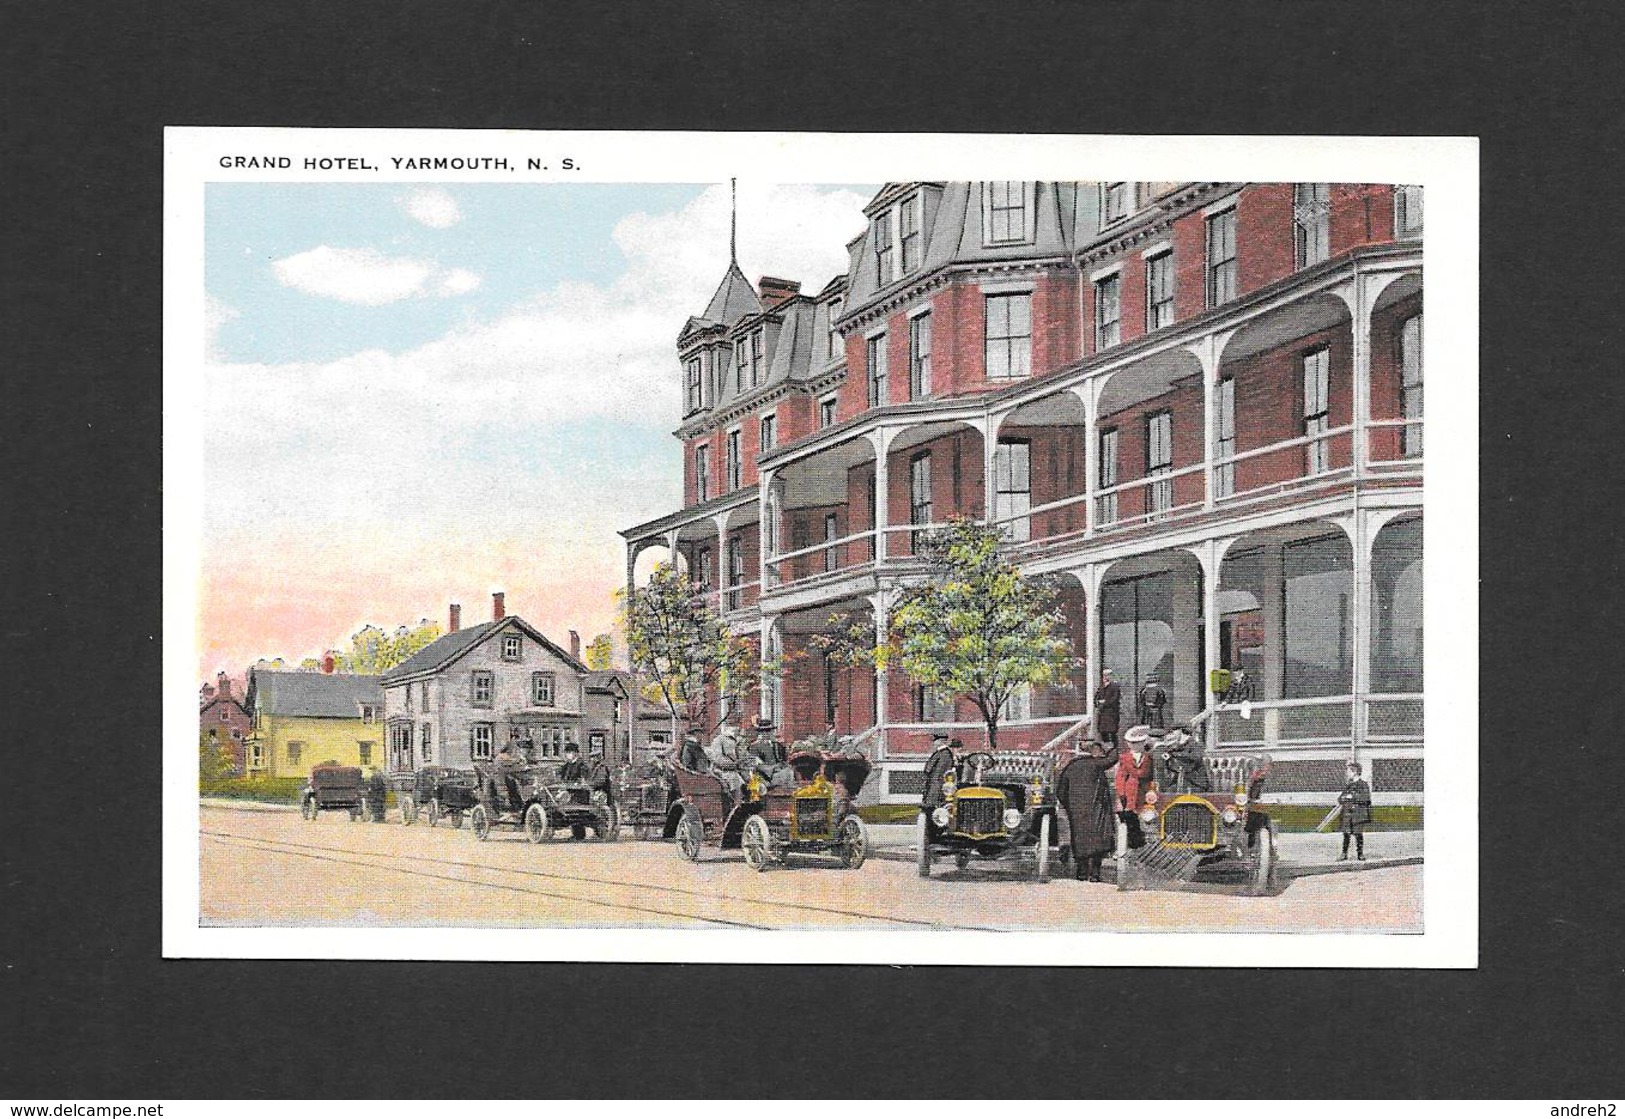 YARMOUTH - NOVA SCOTIA - GRAND HOTEL - ANTIQUE CARS - PUBLISHED BY HARRY McKINLAY - Yarmouth